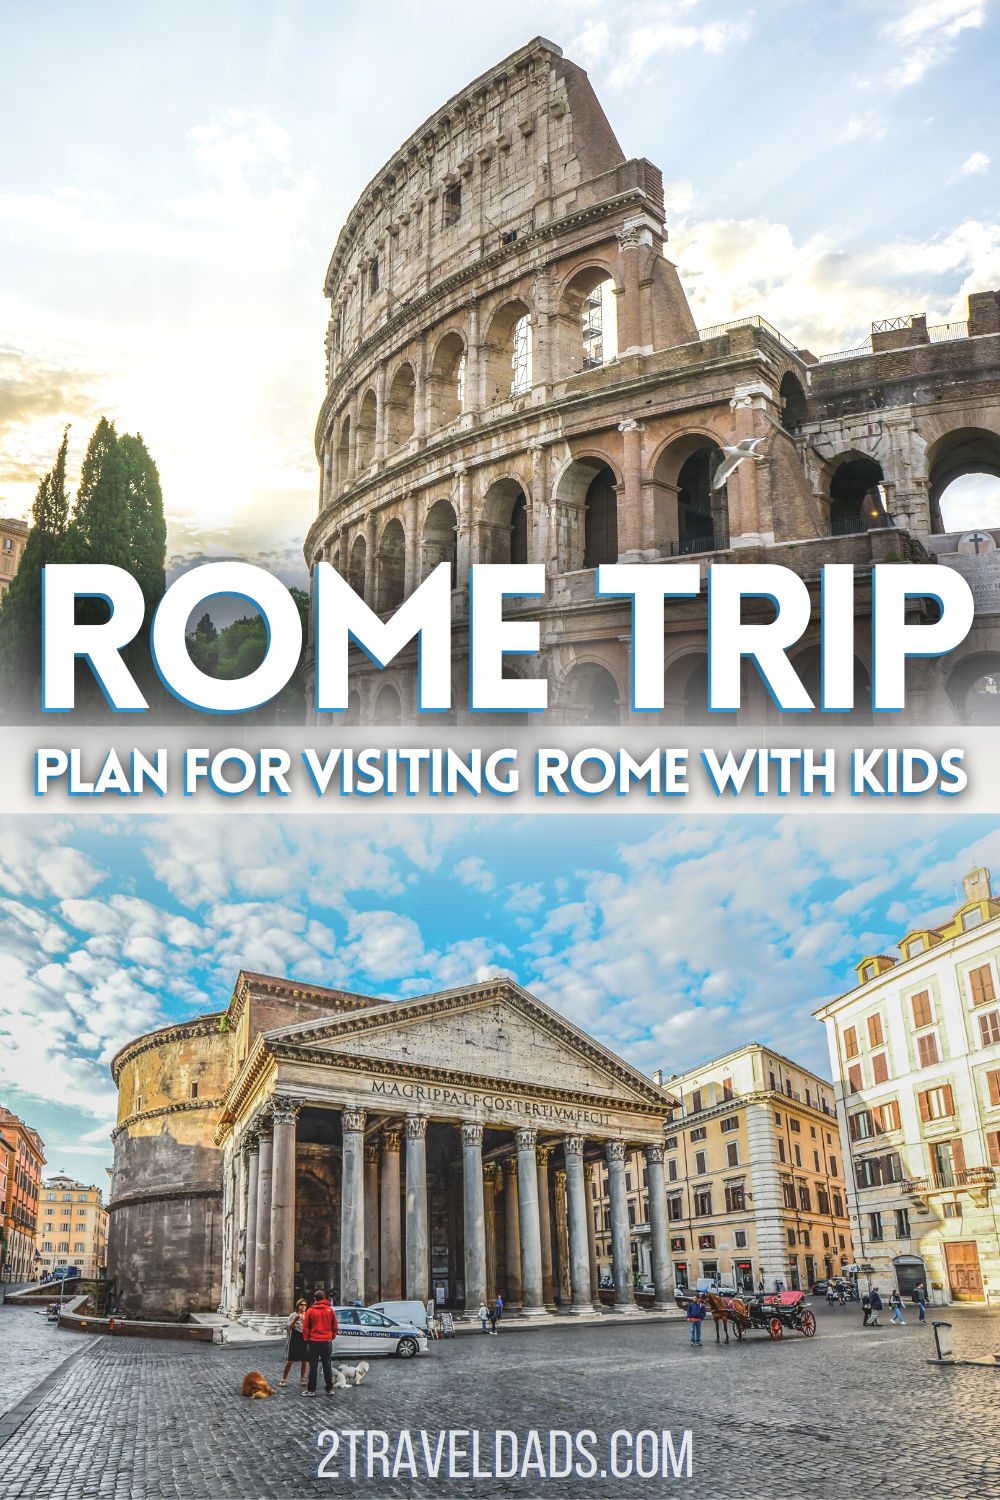 Tips for planning a trip to Rome with kids. From top sights to planning food and activities on your family Italy trip.